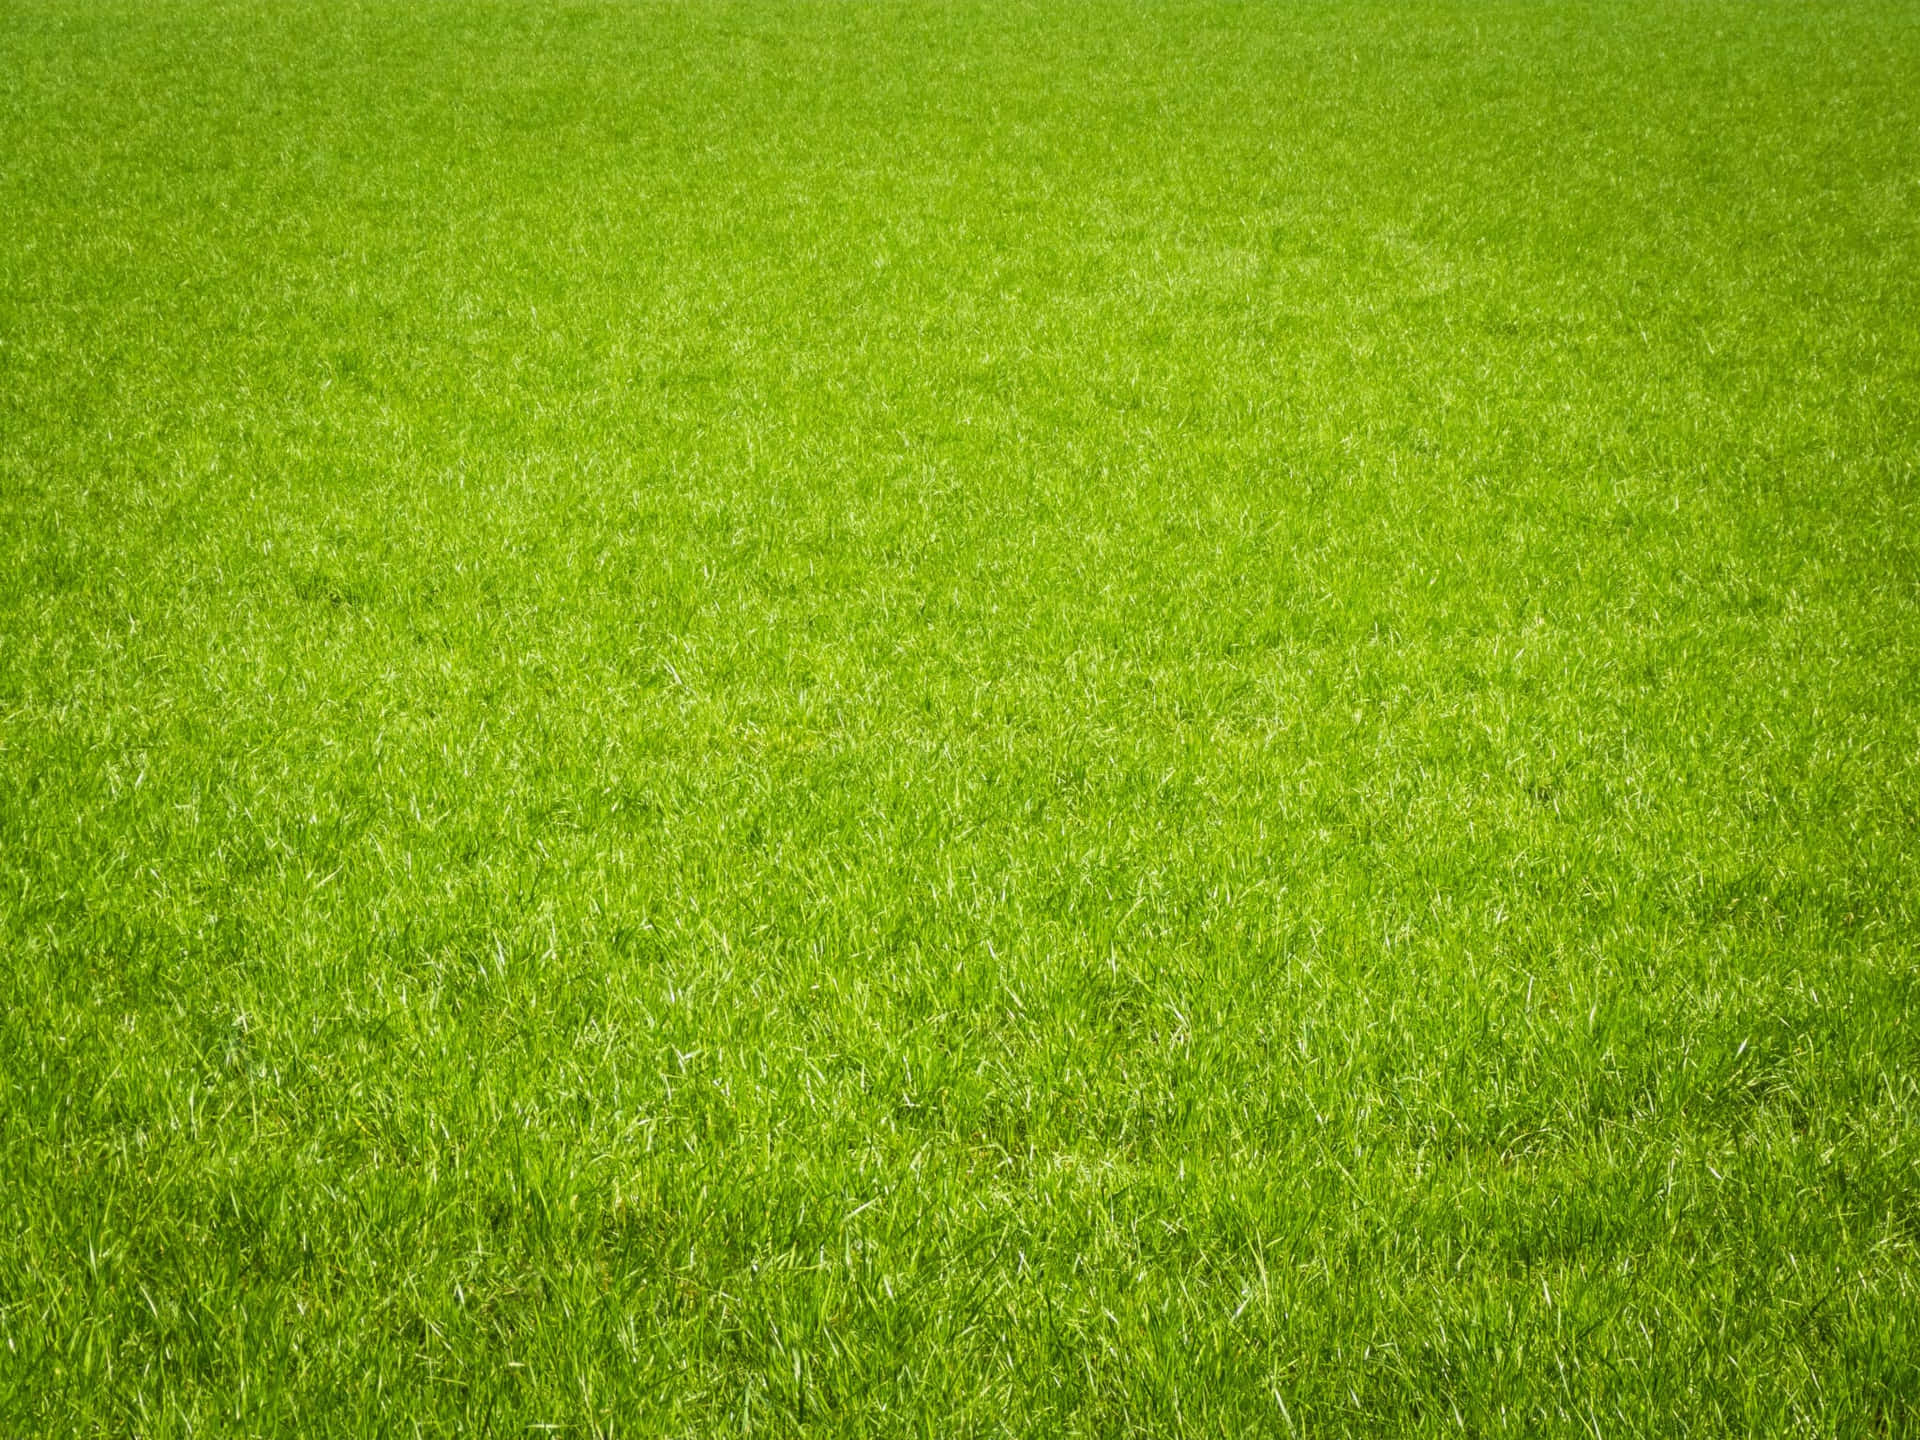 Enjoy a lush and vibrant landscape: close-up photo of green grass and blue sky